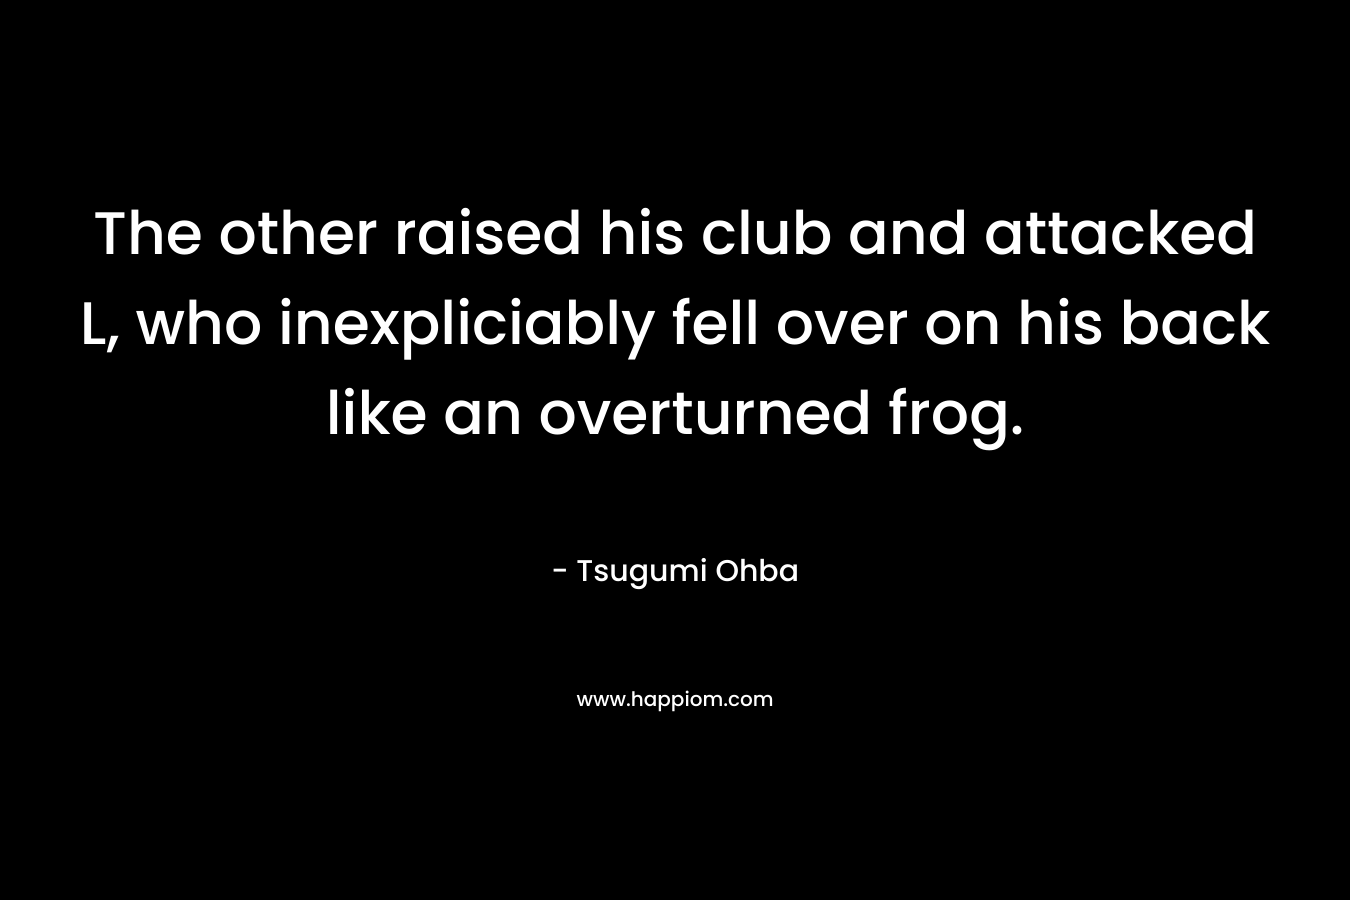 The other raised his club and attacked L, who inexpliciably fell over on his back like an overturned frog. – Tsugumi Ohba